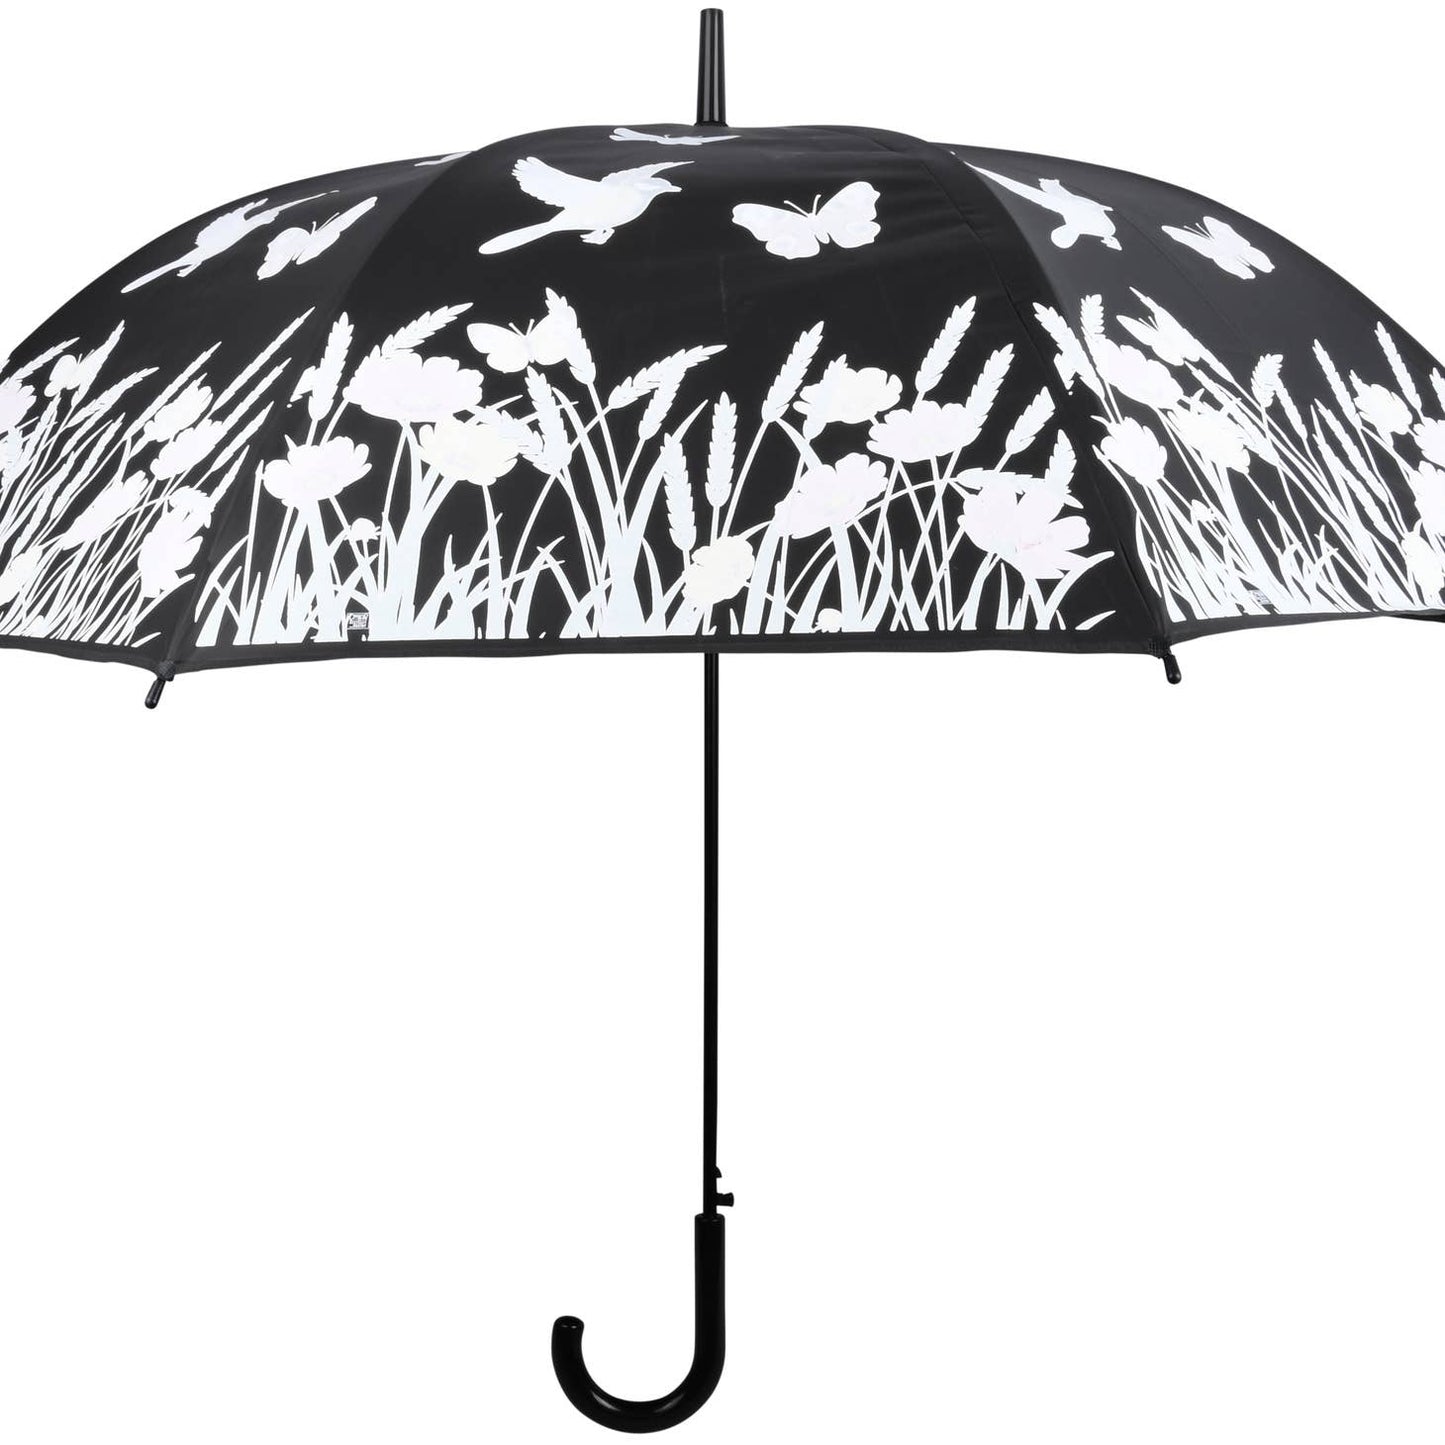 Umbrella: Color Changing - Adult Size